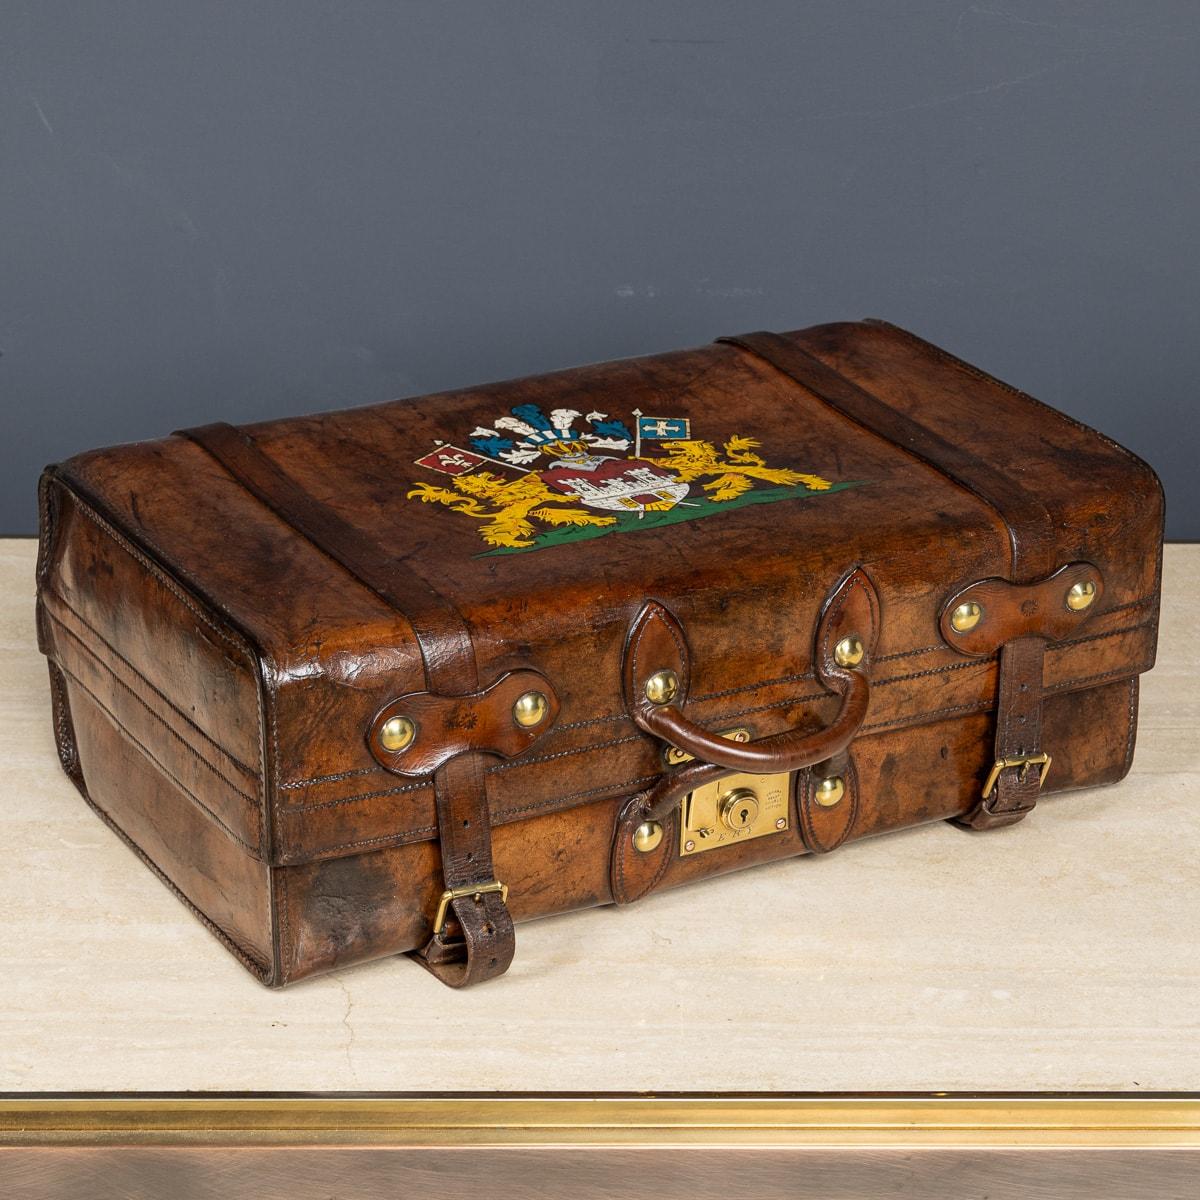 Antique mid-19th Century Victorian leather suitcase with a painted family crest. The suitcase is very well kept and features the original cotton lining, document holder and dust covers with leather straps. Throughout, brass hardware such as the lock